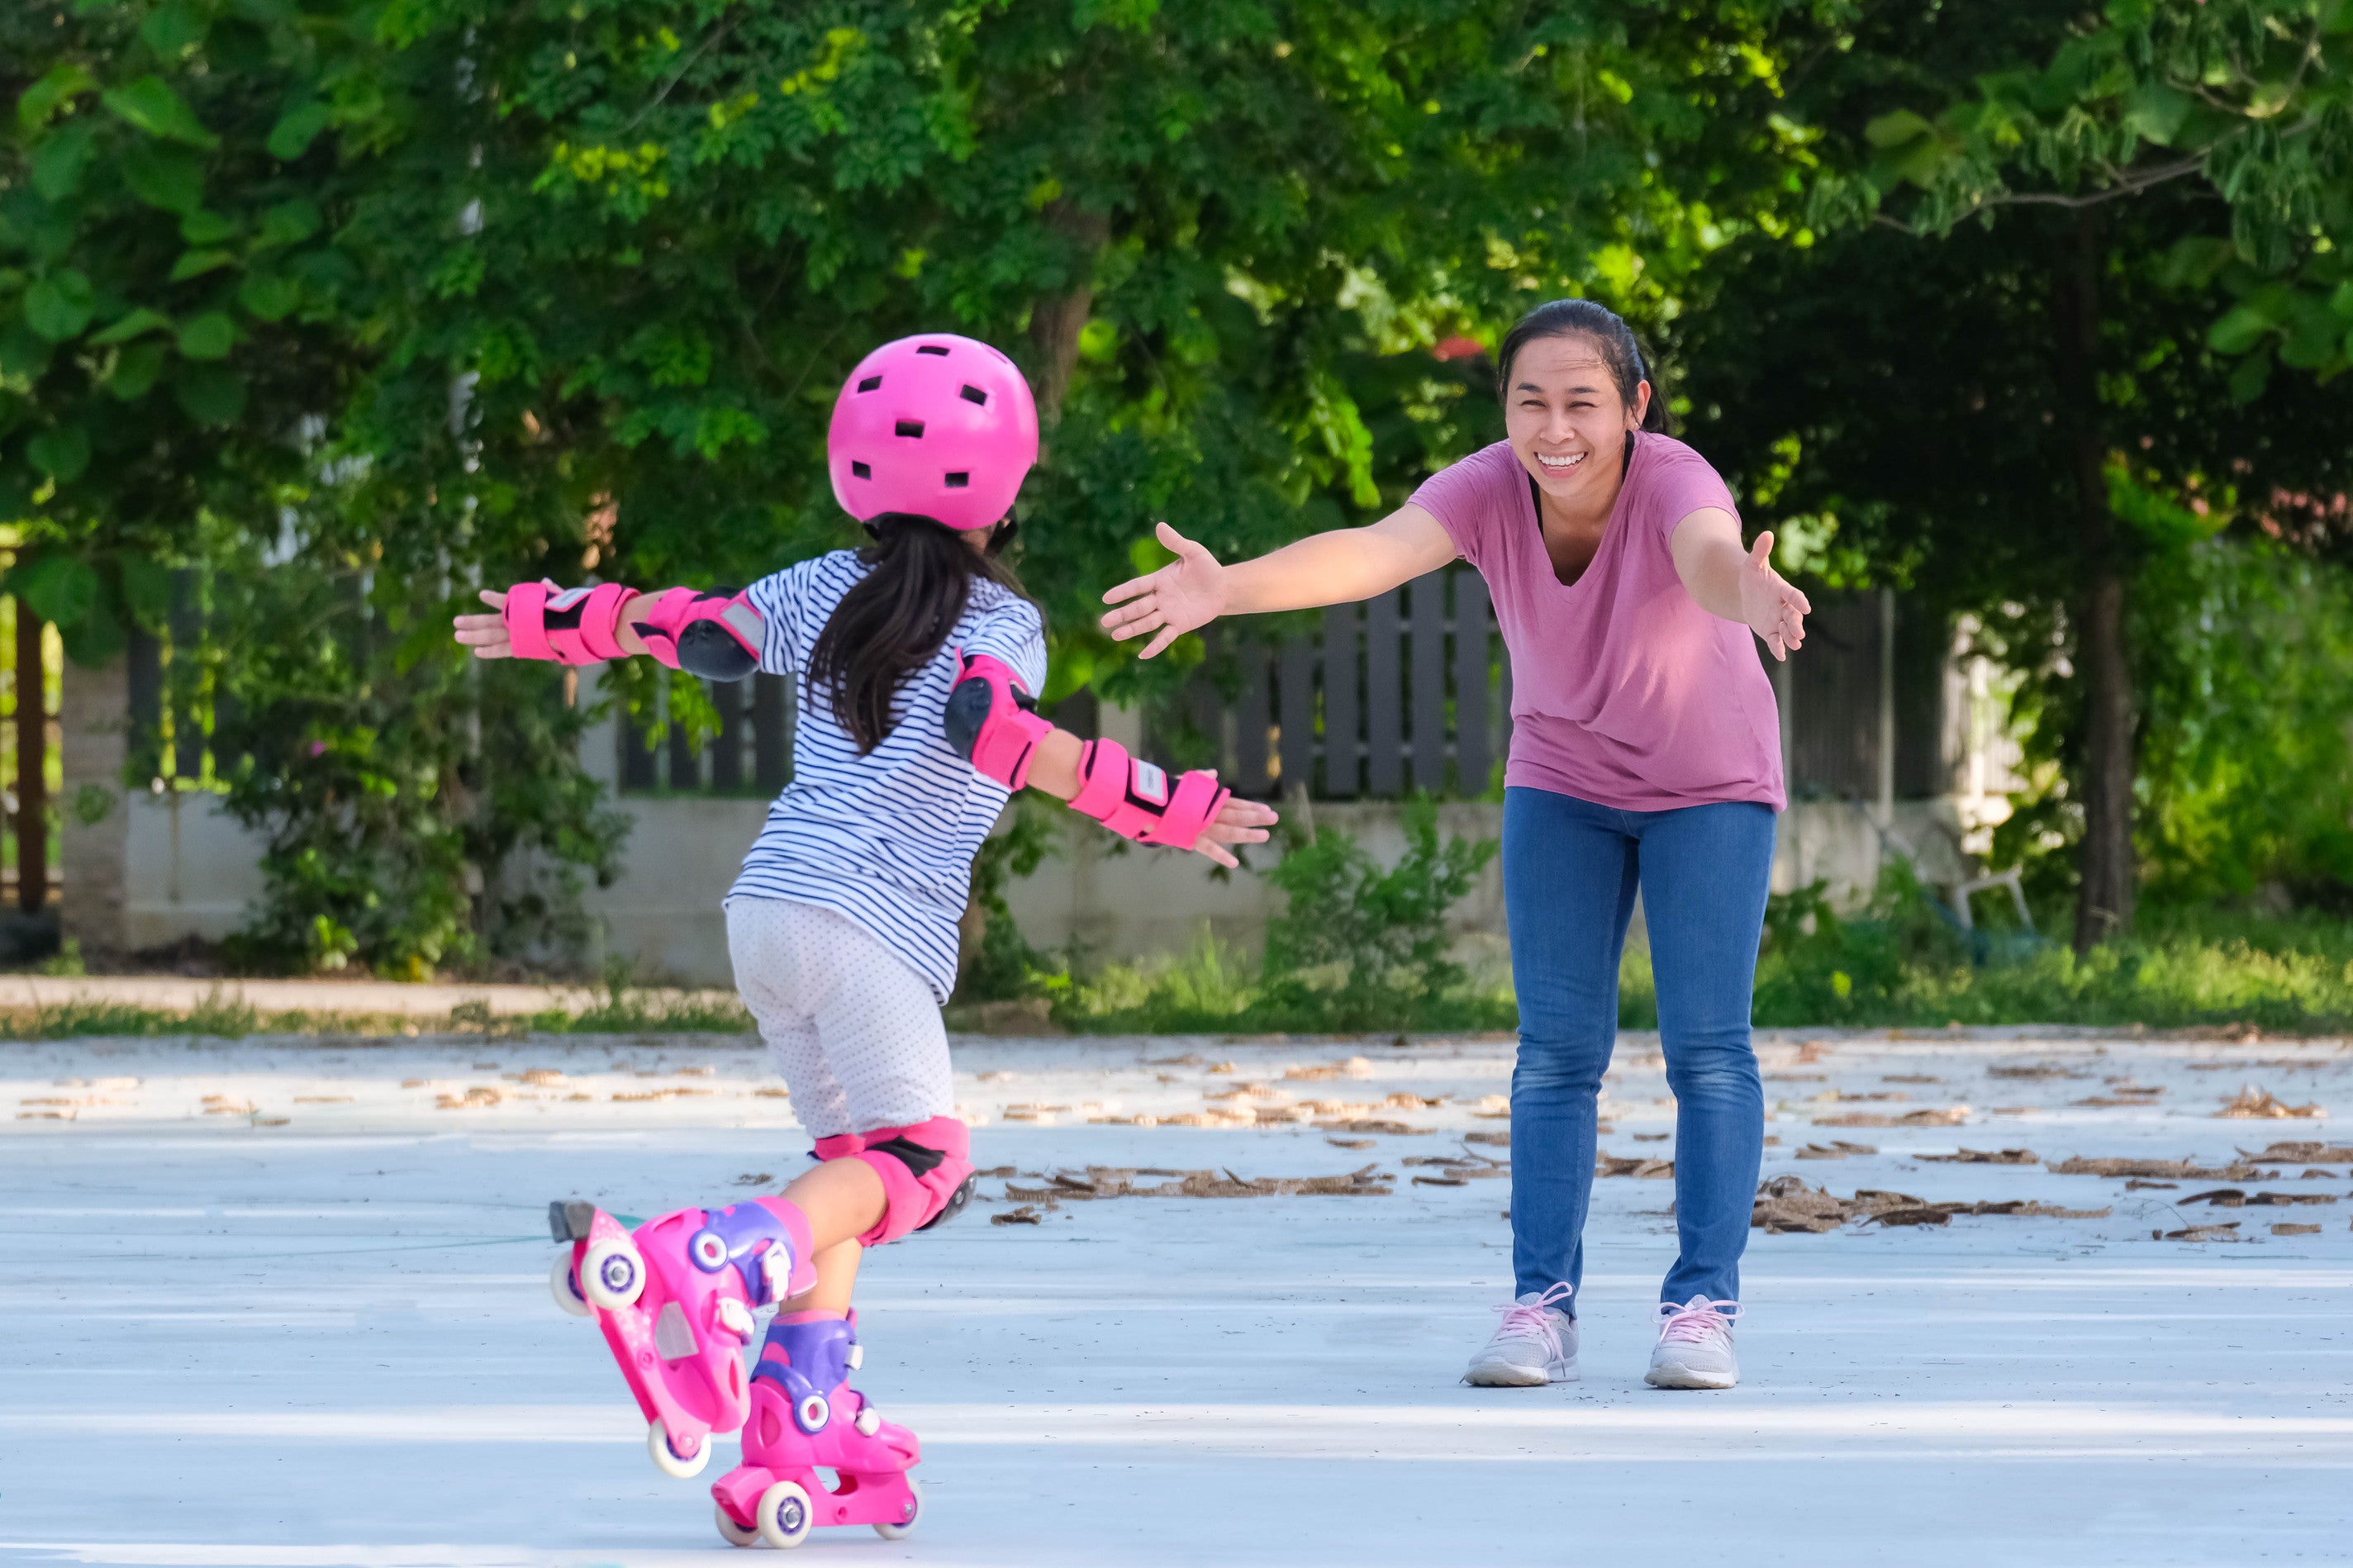 Roller Skates For Kids: How To Learn Roller Skating | Xino Sports